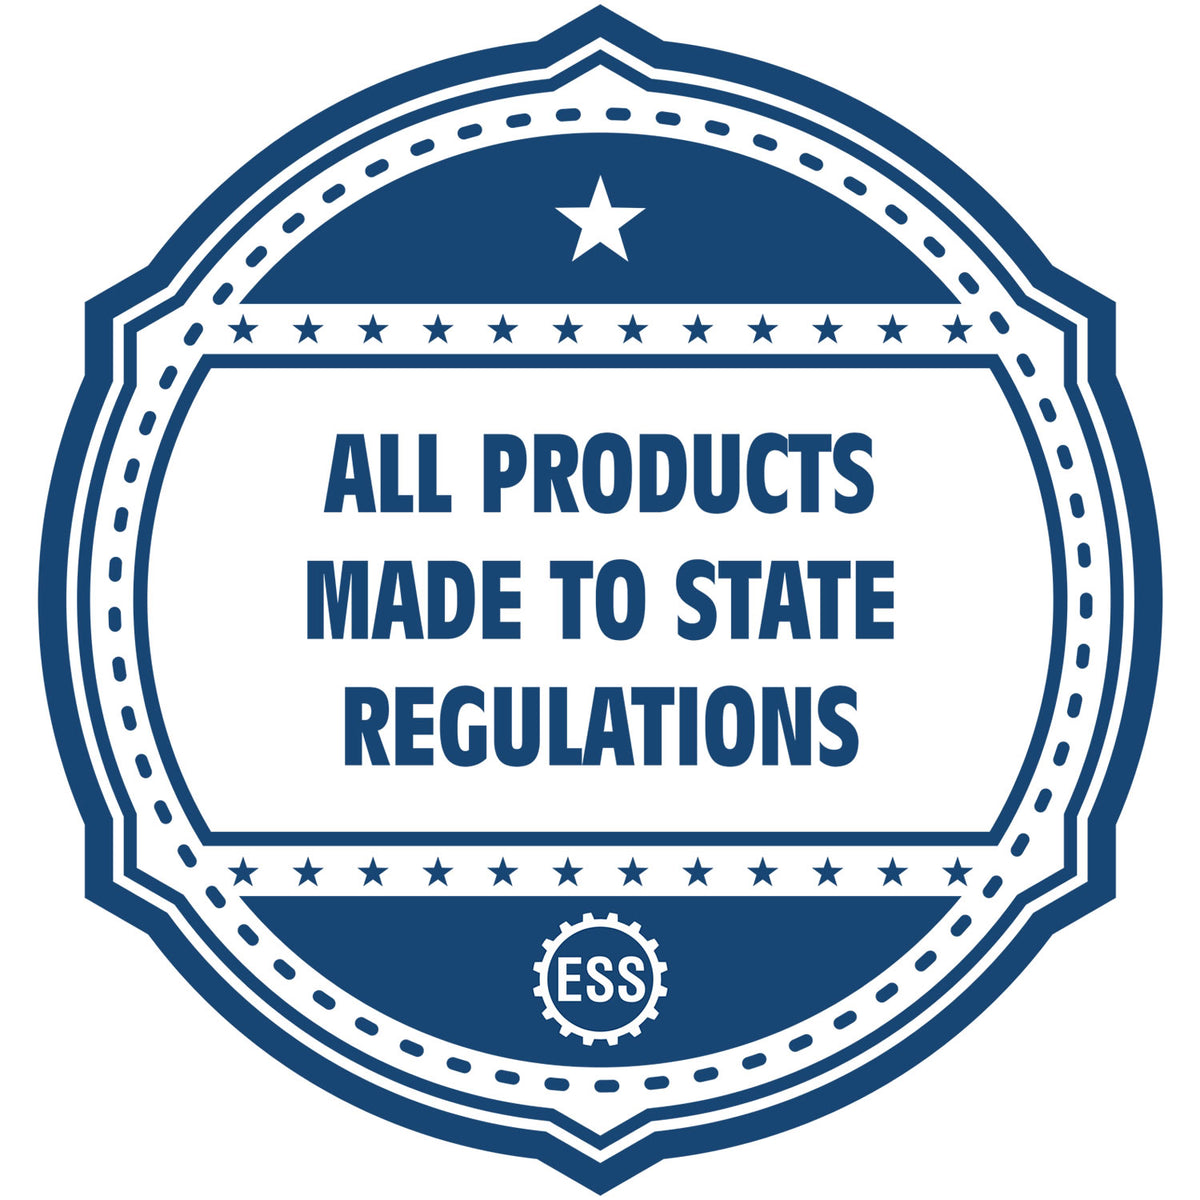 An icon or badge element for the Slim Pre-Inked North Dakota Land Surveyor Seal Stamp showing that this product is made in compliance with state regulations.